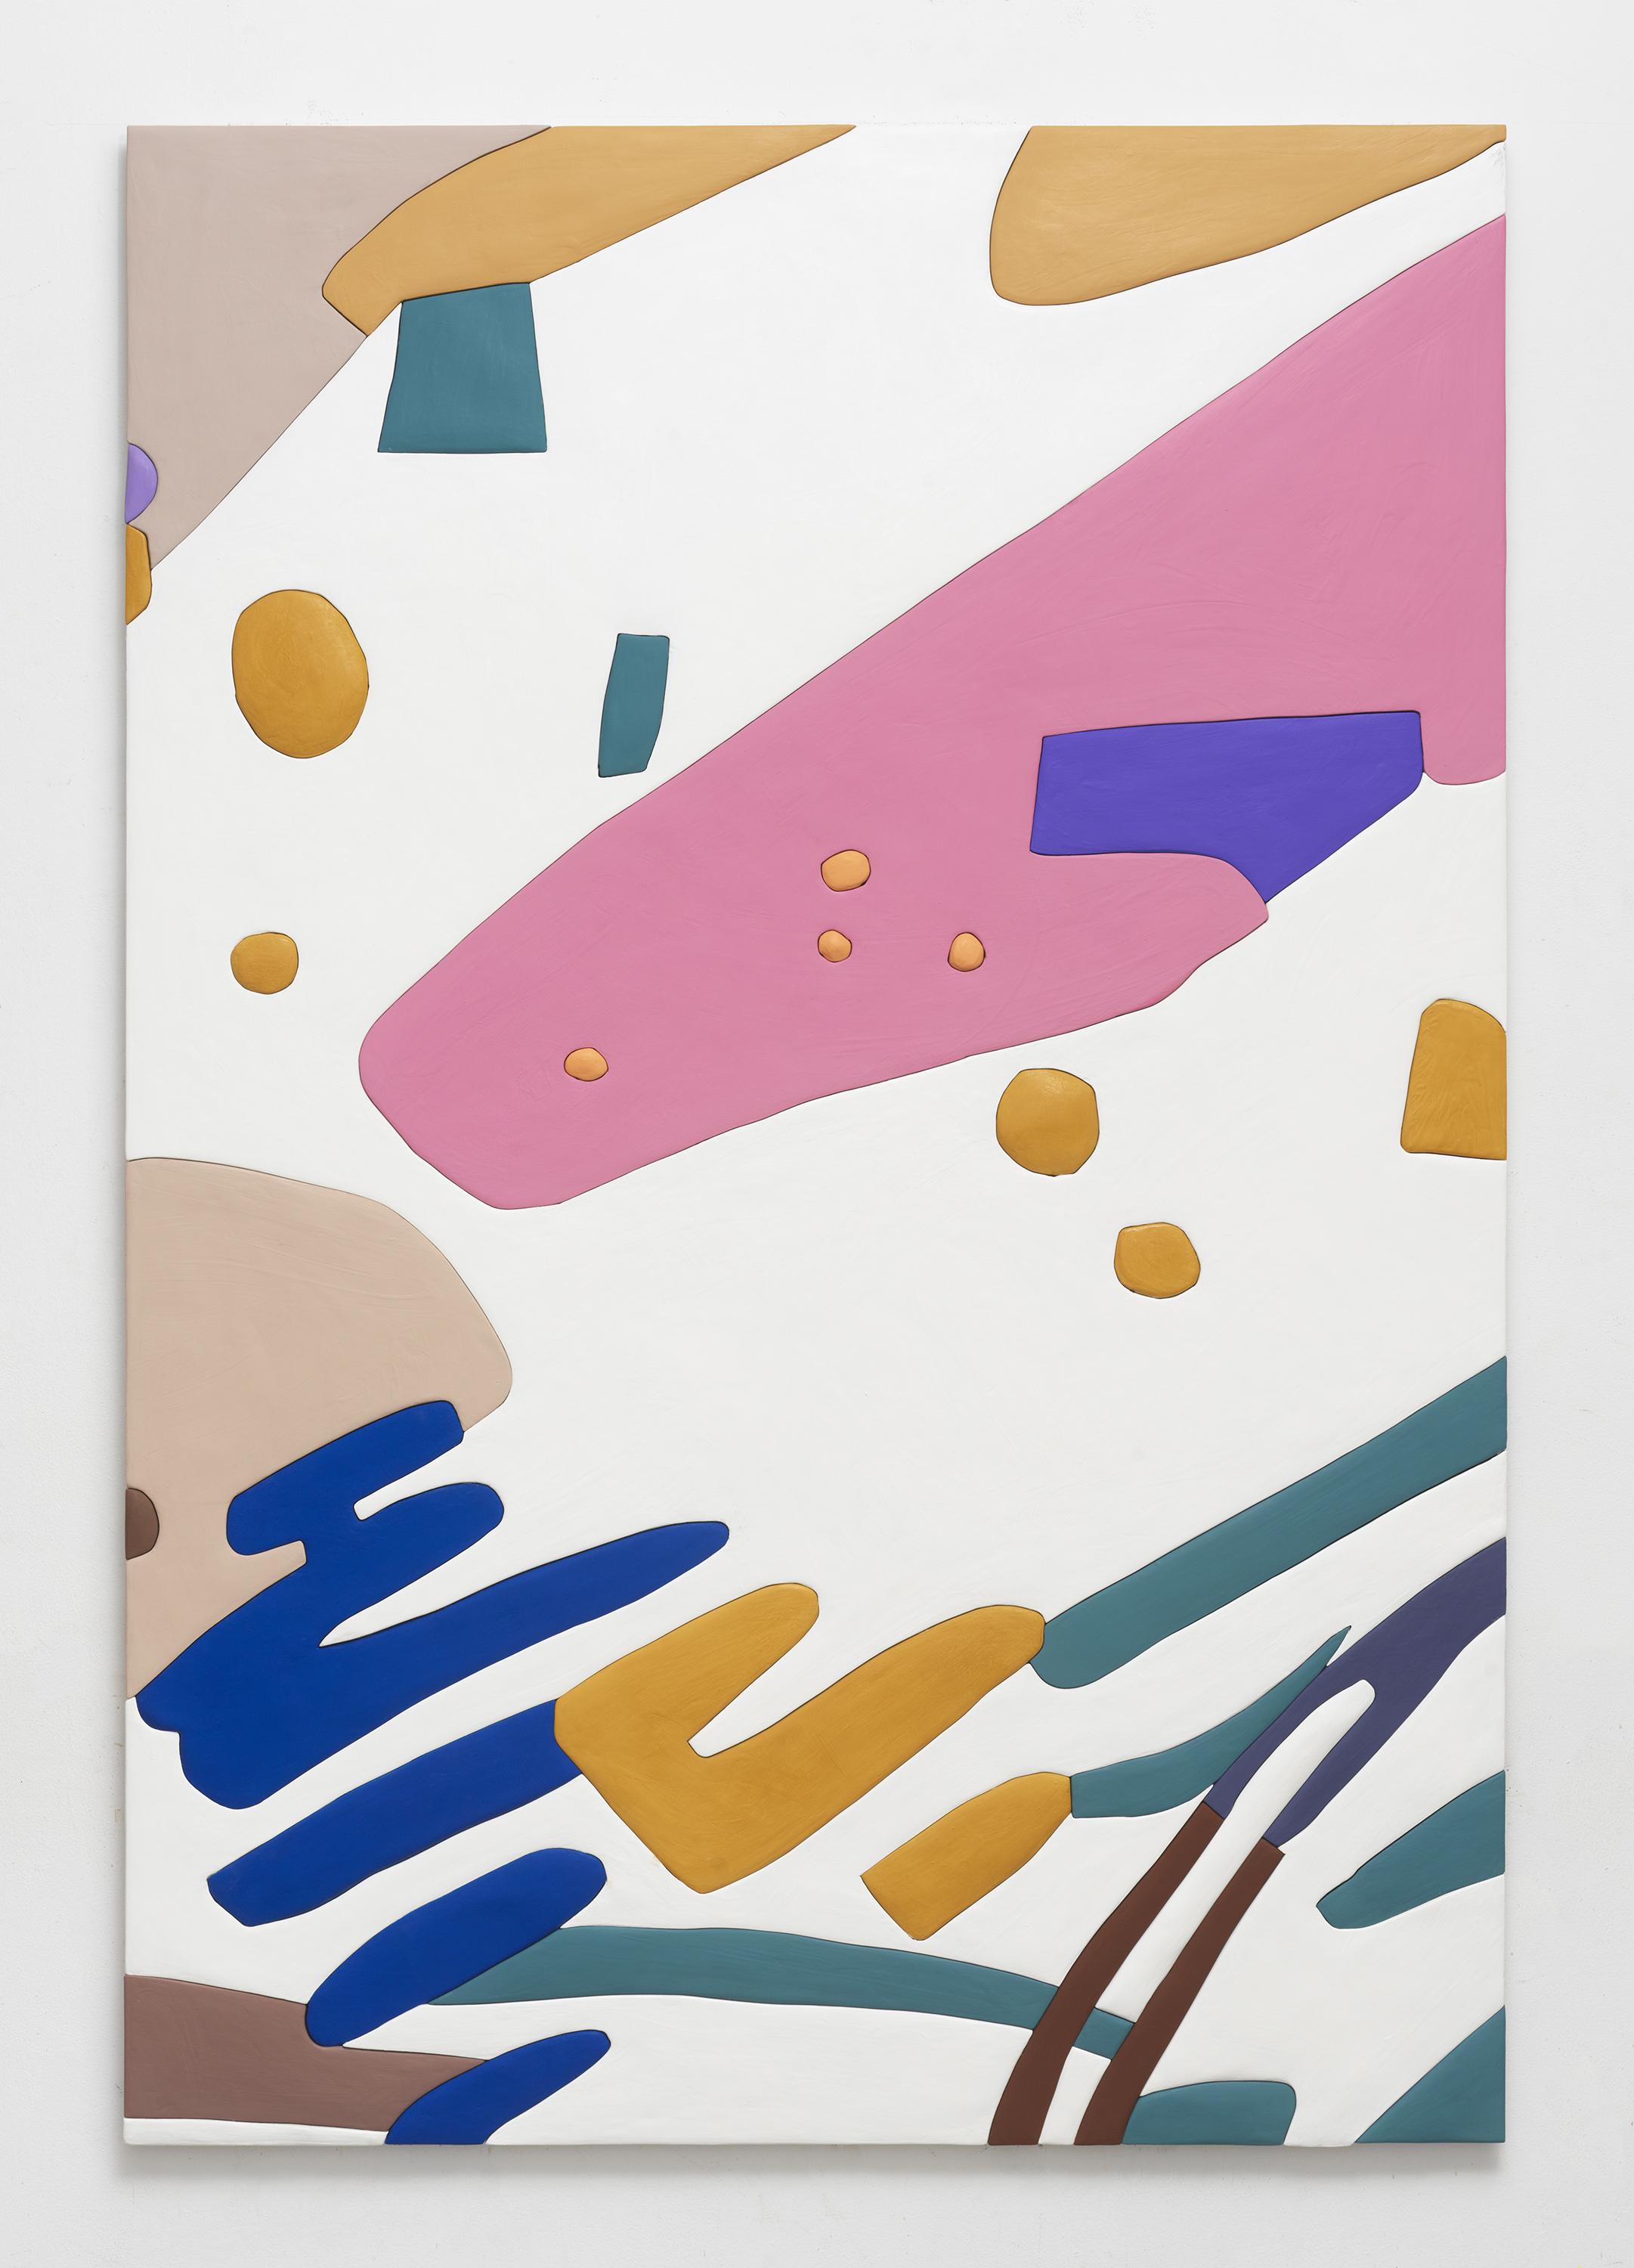 This abstract composition of various shapes of pink, ochre, dark blue, tan, and turquoise appears to have a slightly raised texture to each squiggle, dot, and line.